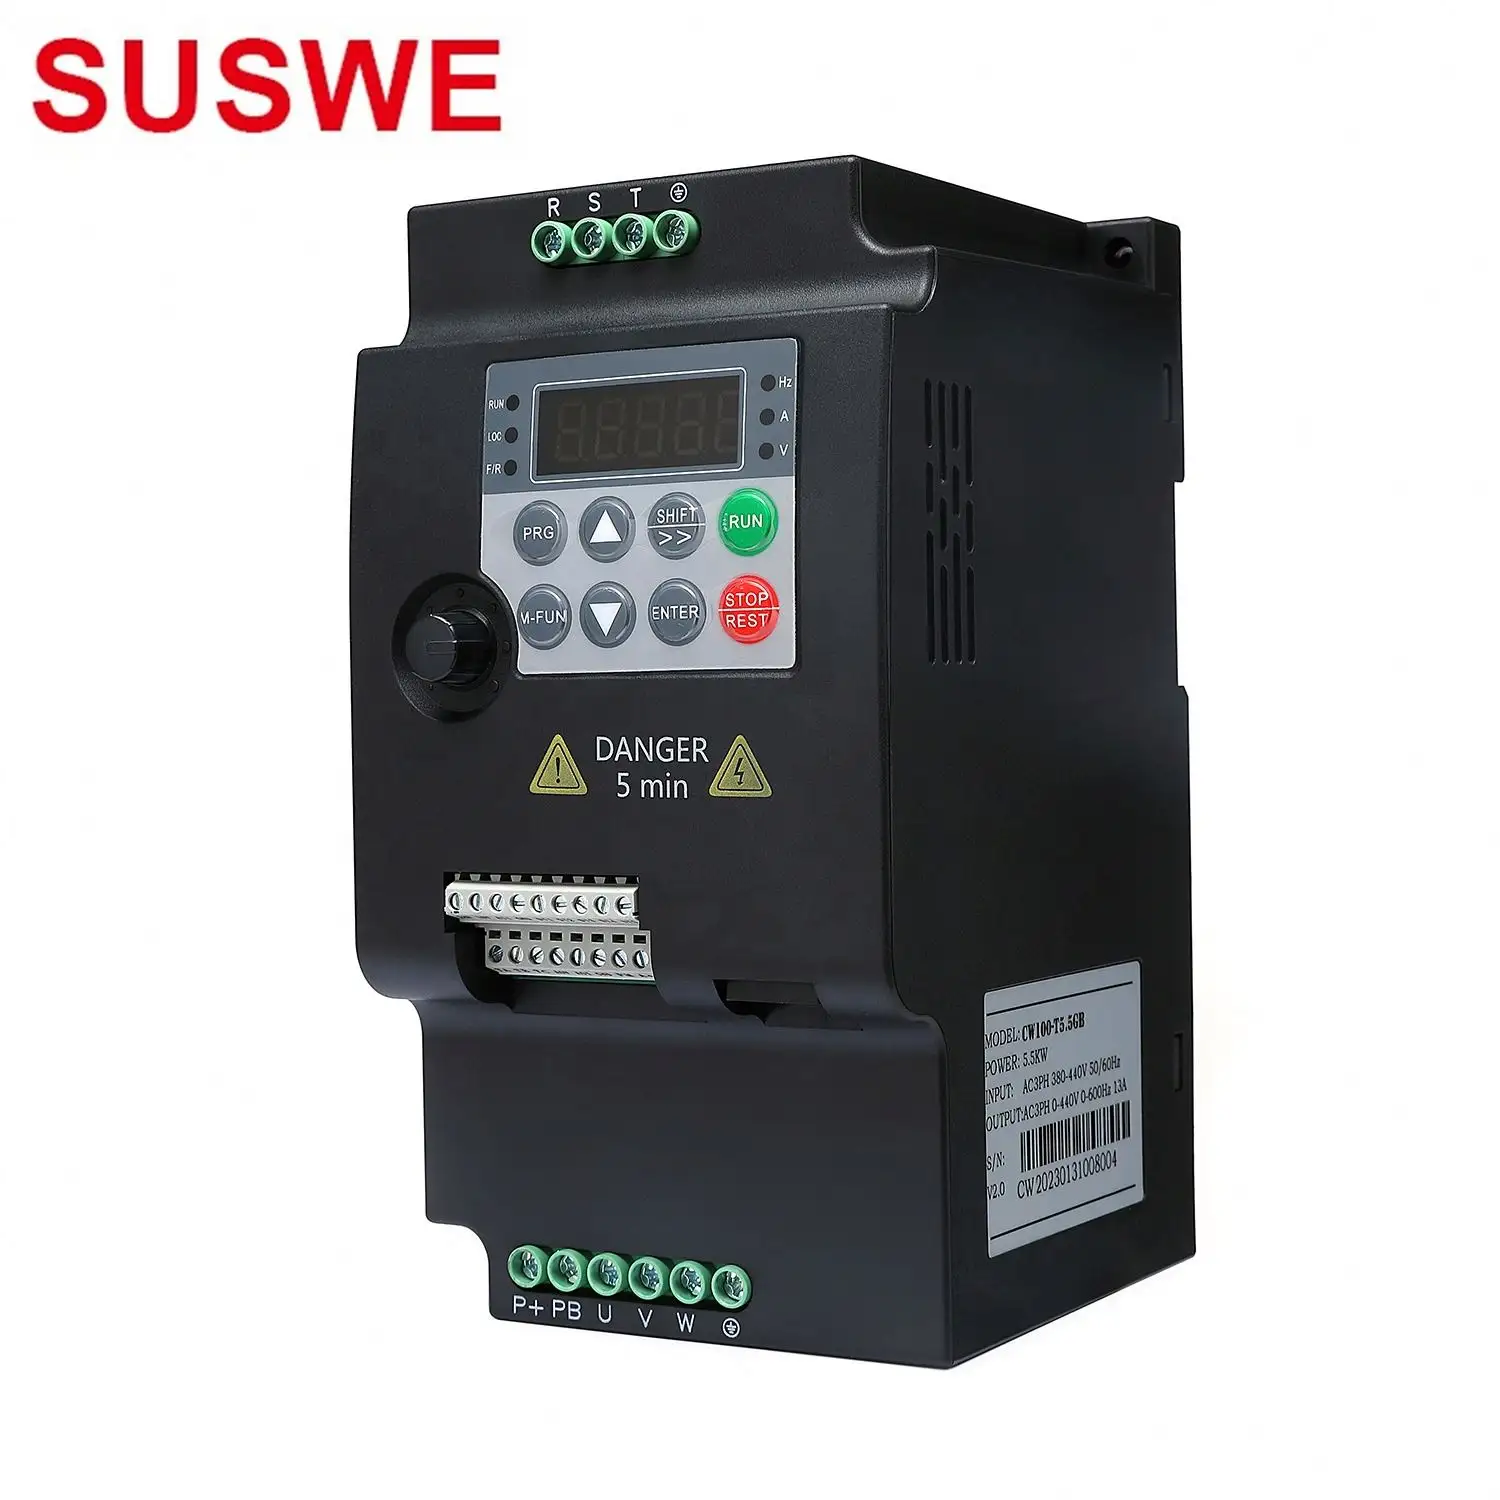 SUSWE Three Phase 380V Output Frequency Converters  VFDs  with Power Ranging from 0.75kW to 5.5kW